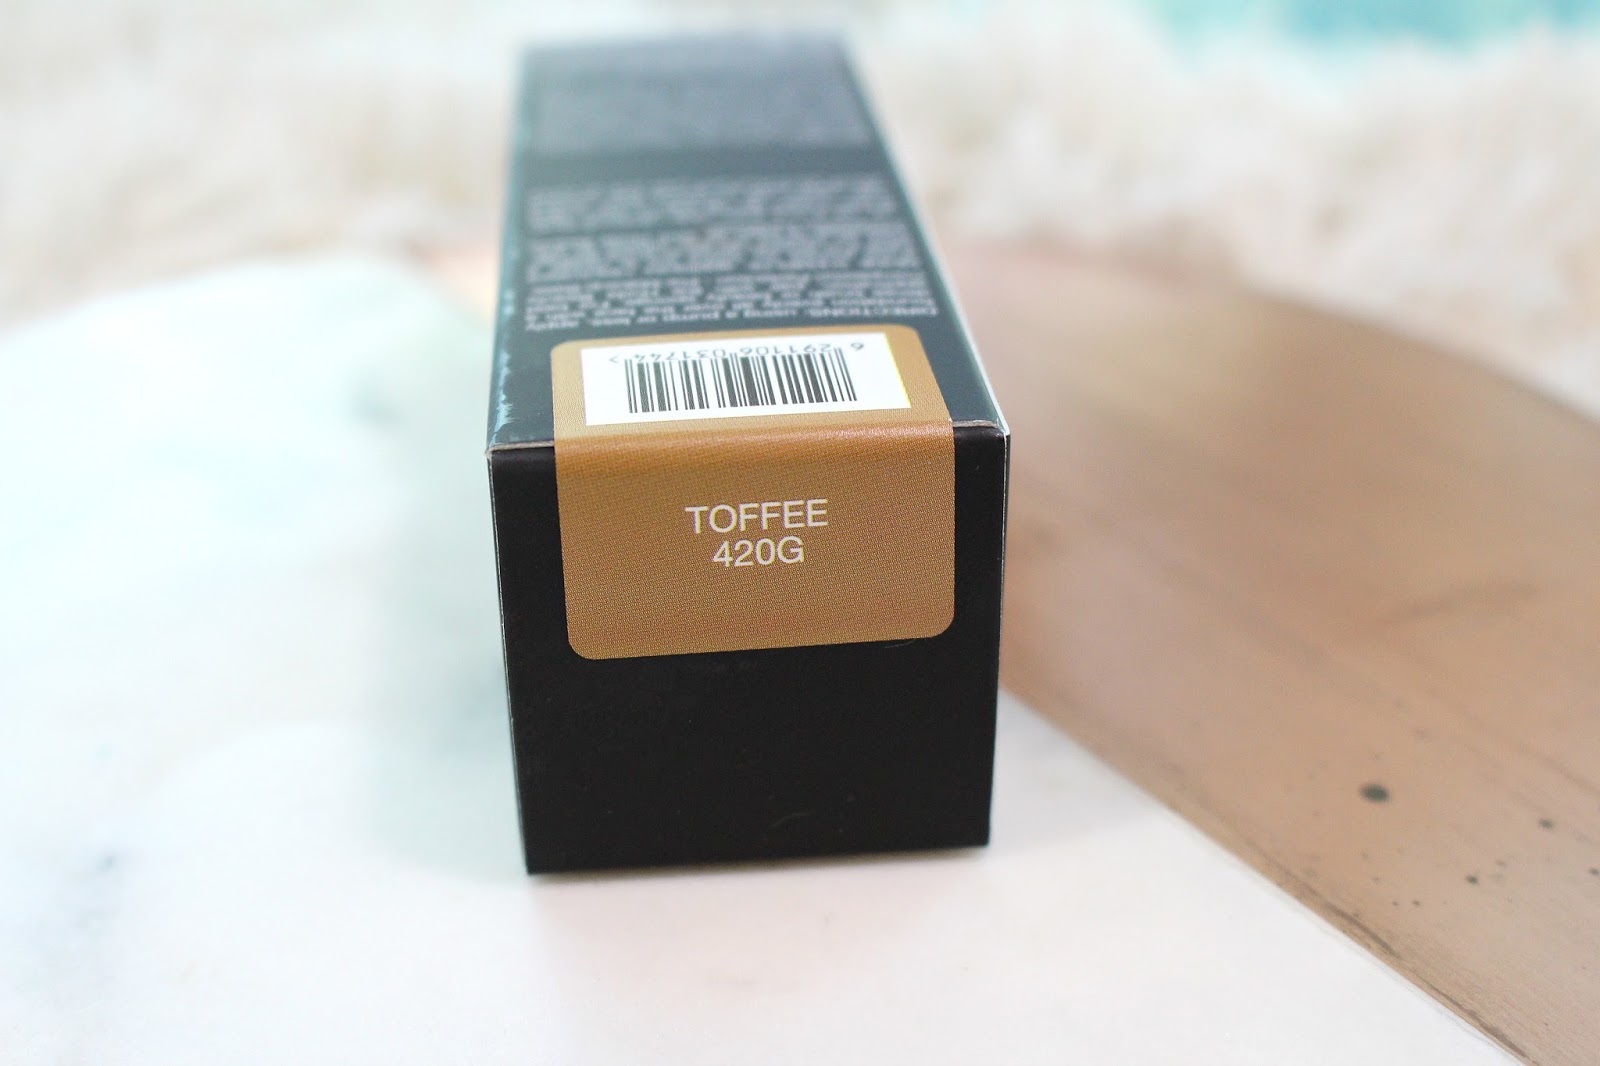 Samantha Jane Huda Beauty Faux Filter Foundation Shade Comparisons 4 Toffee